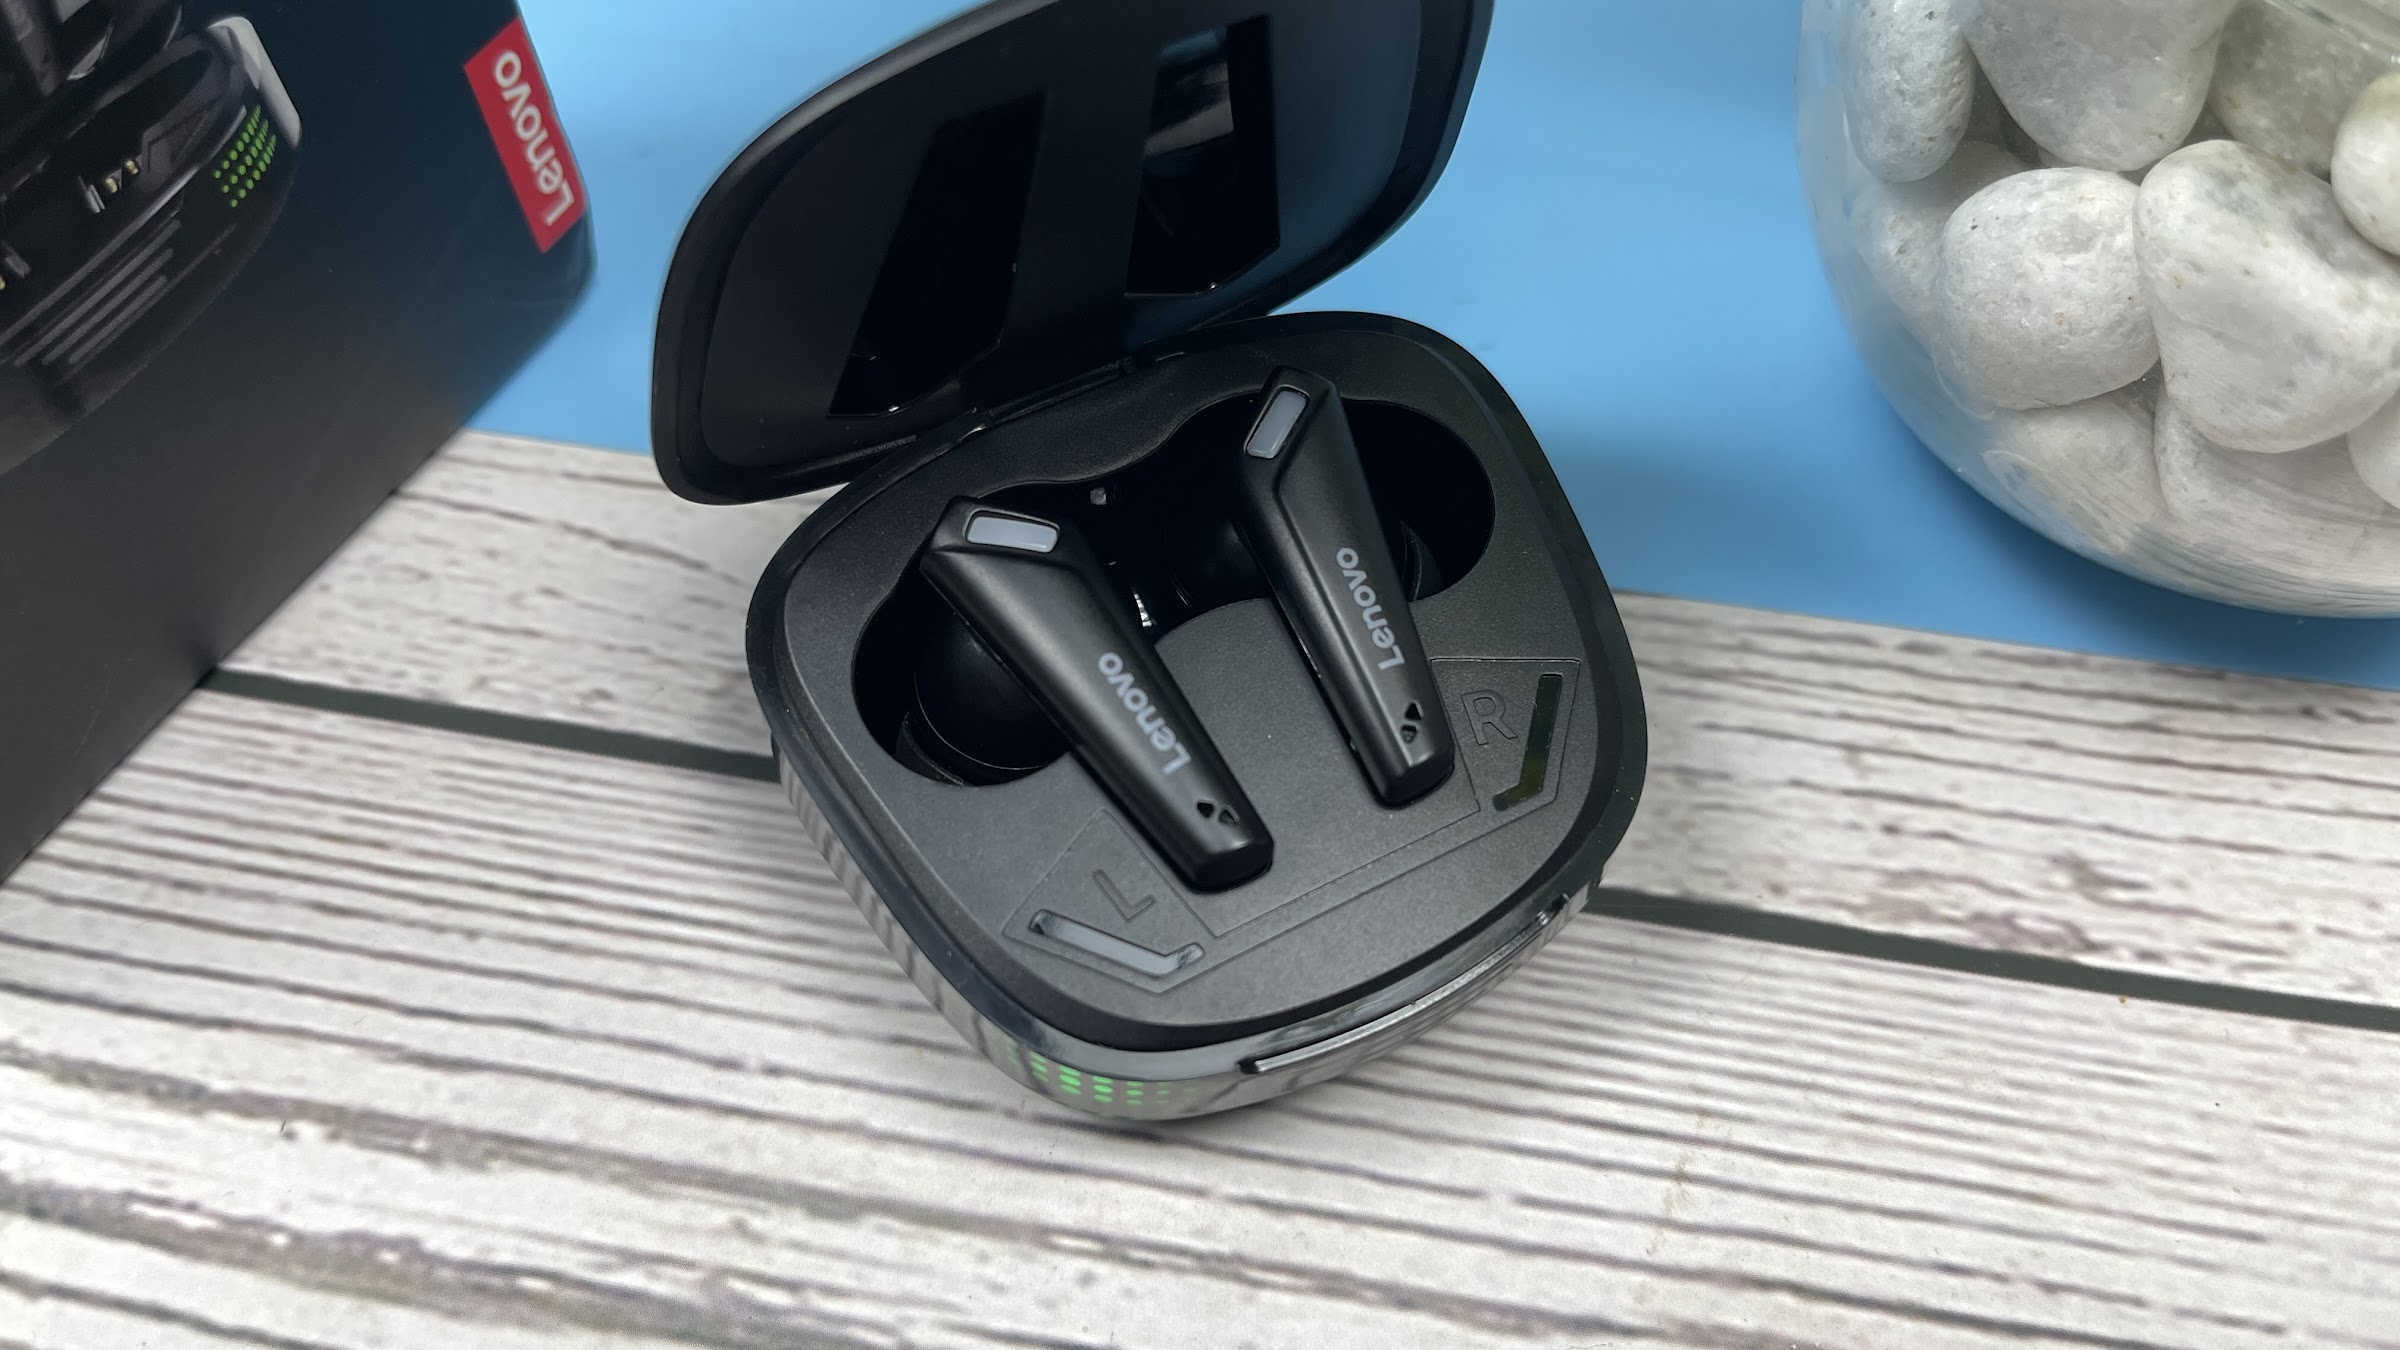 Lenovo XT85II Review: A Budget Earbuds with Gaming Design